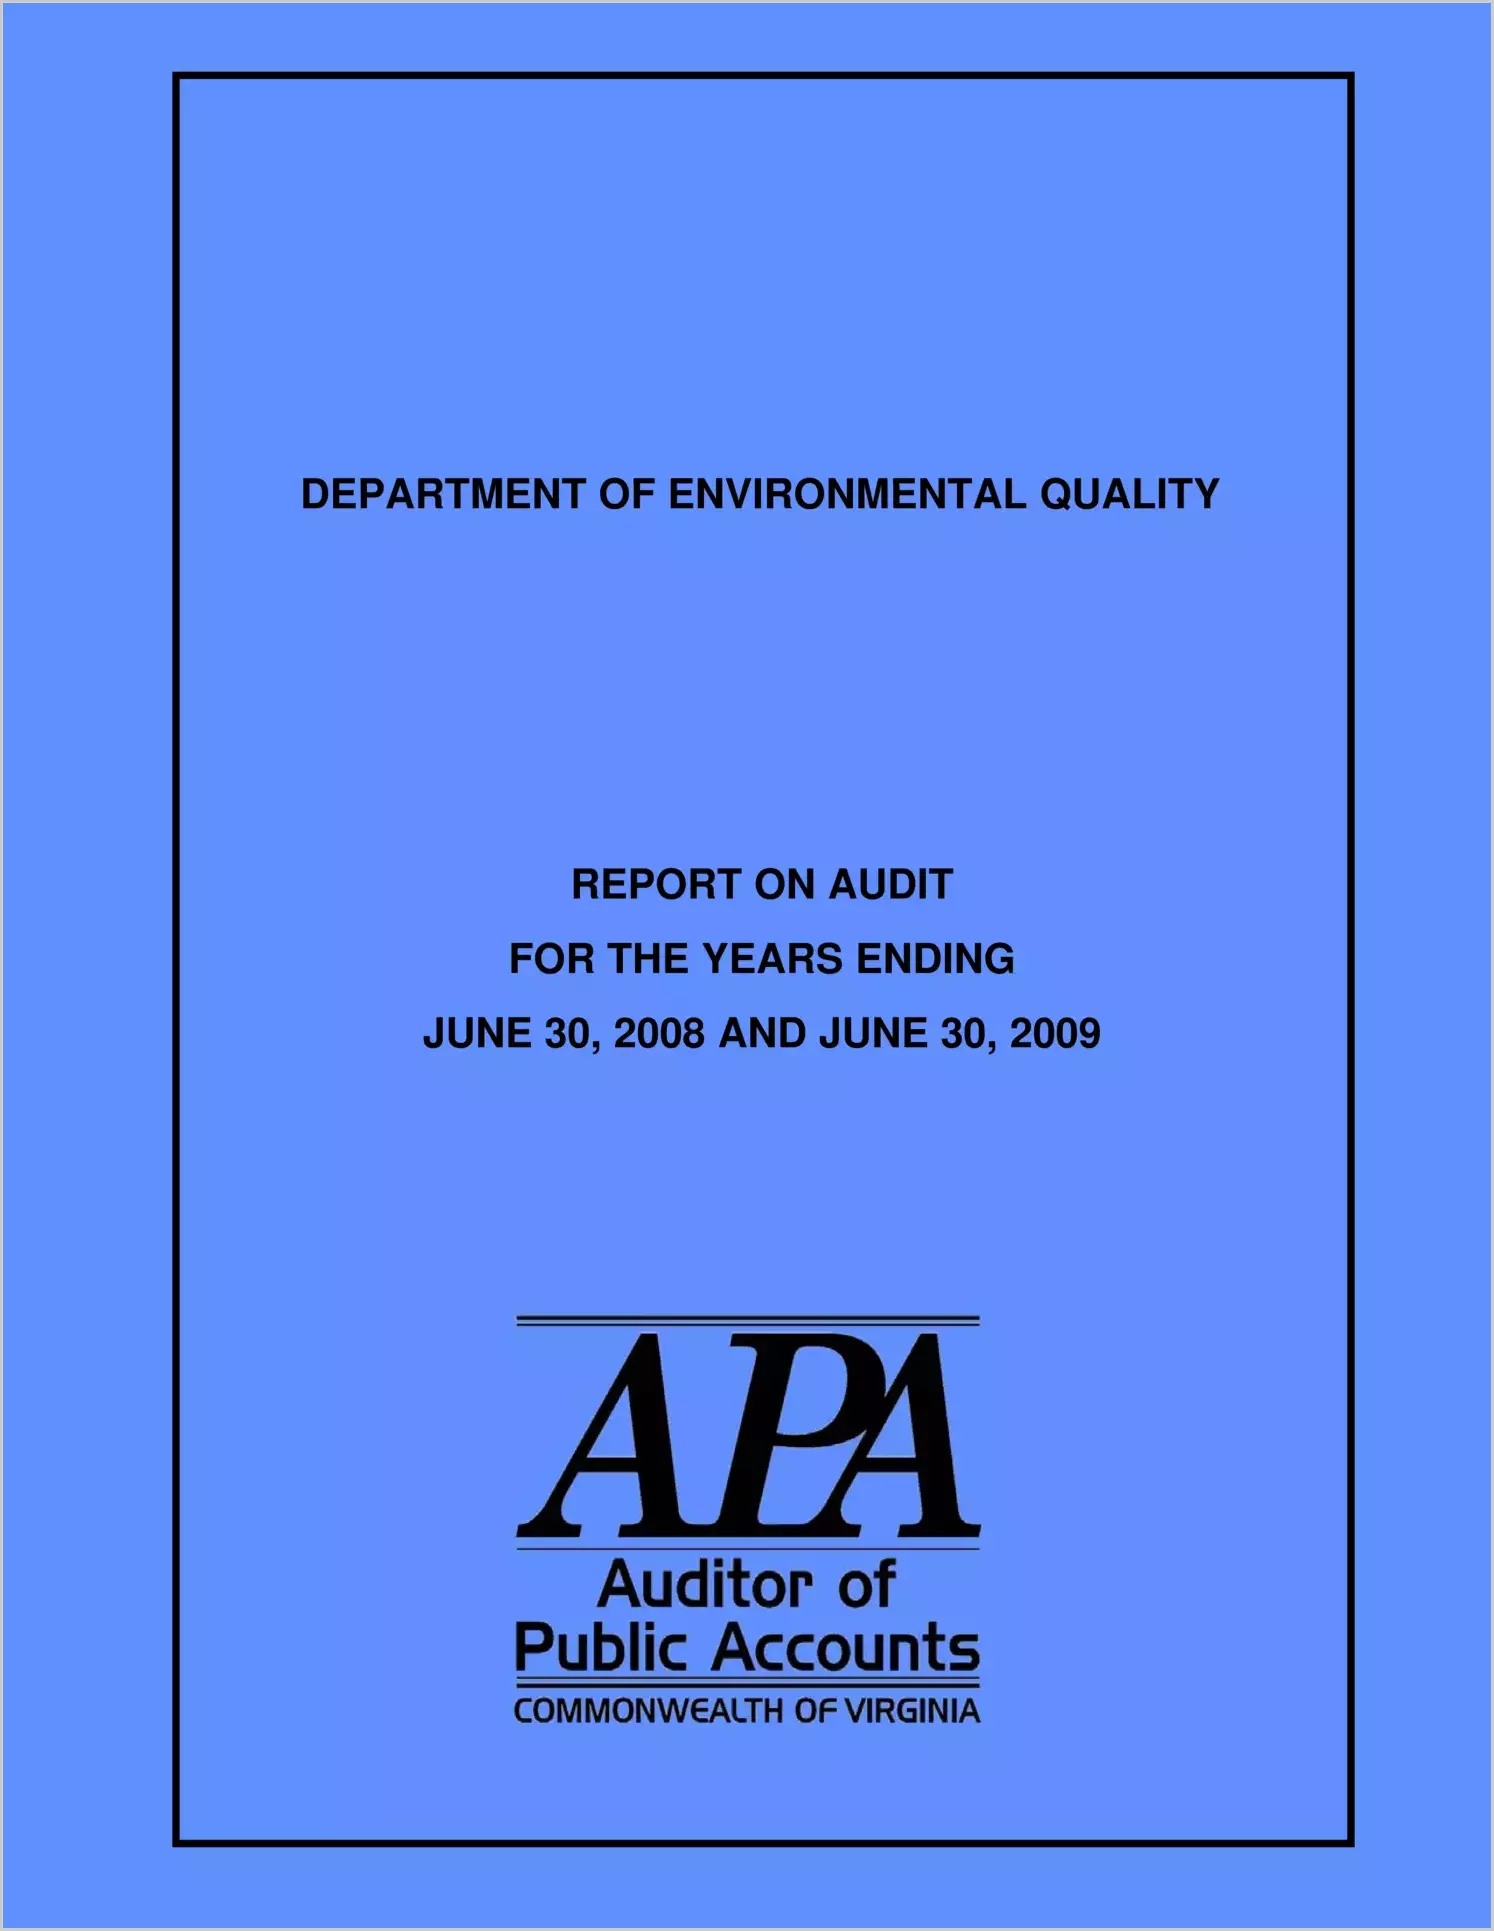 Department of Environmental Quality - for years ending June 30, 2008 and June 30, 2009